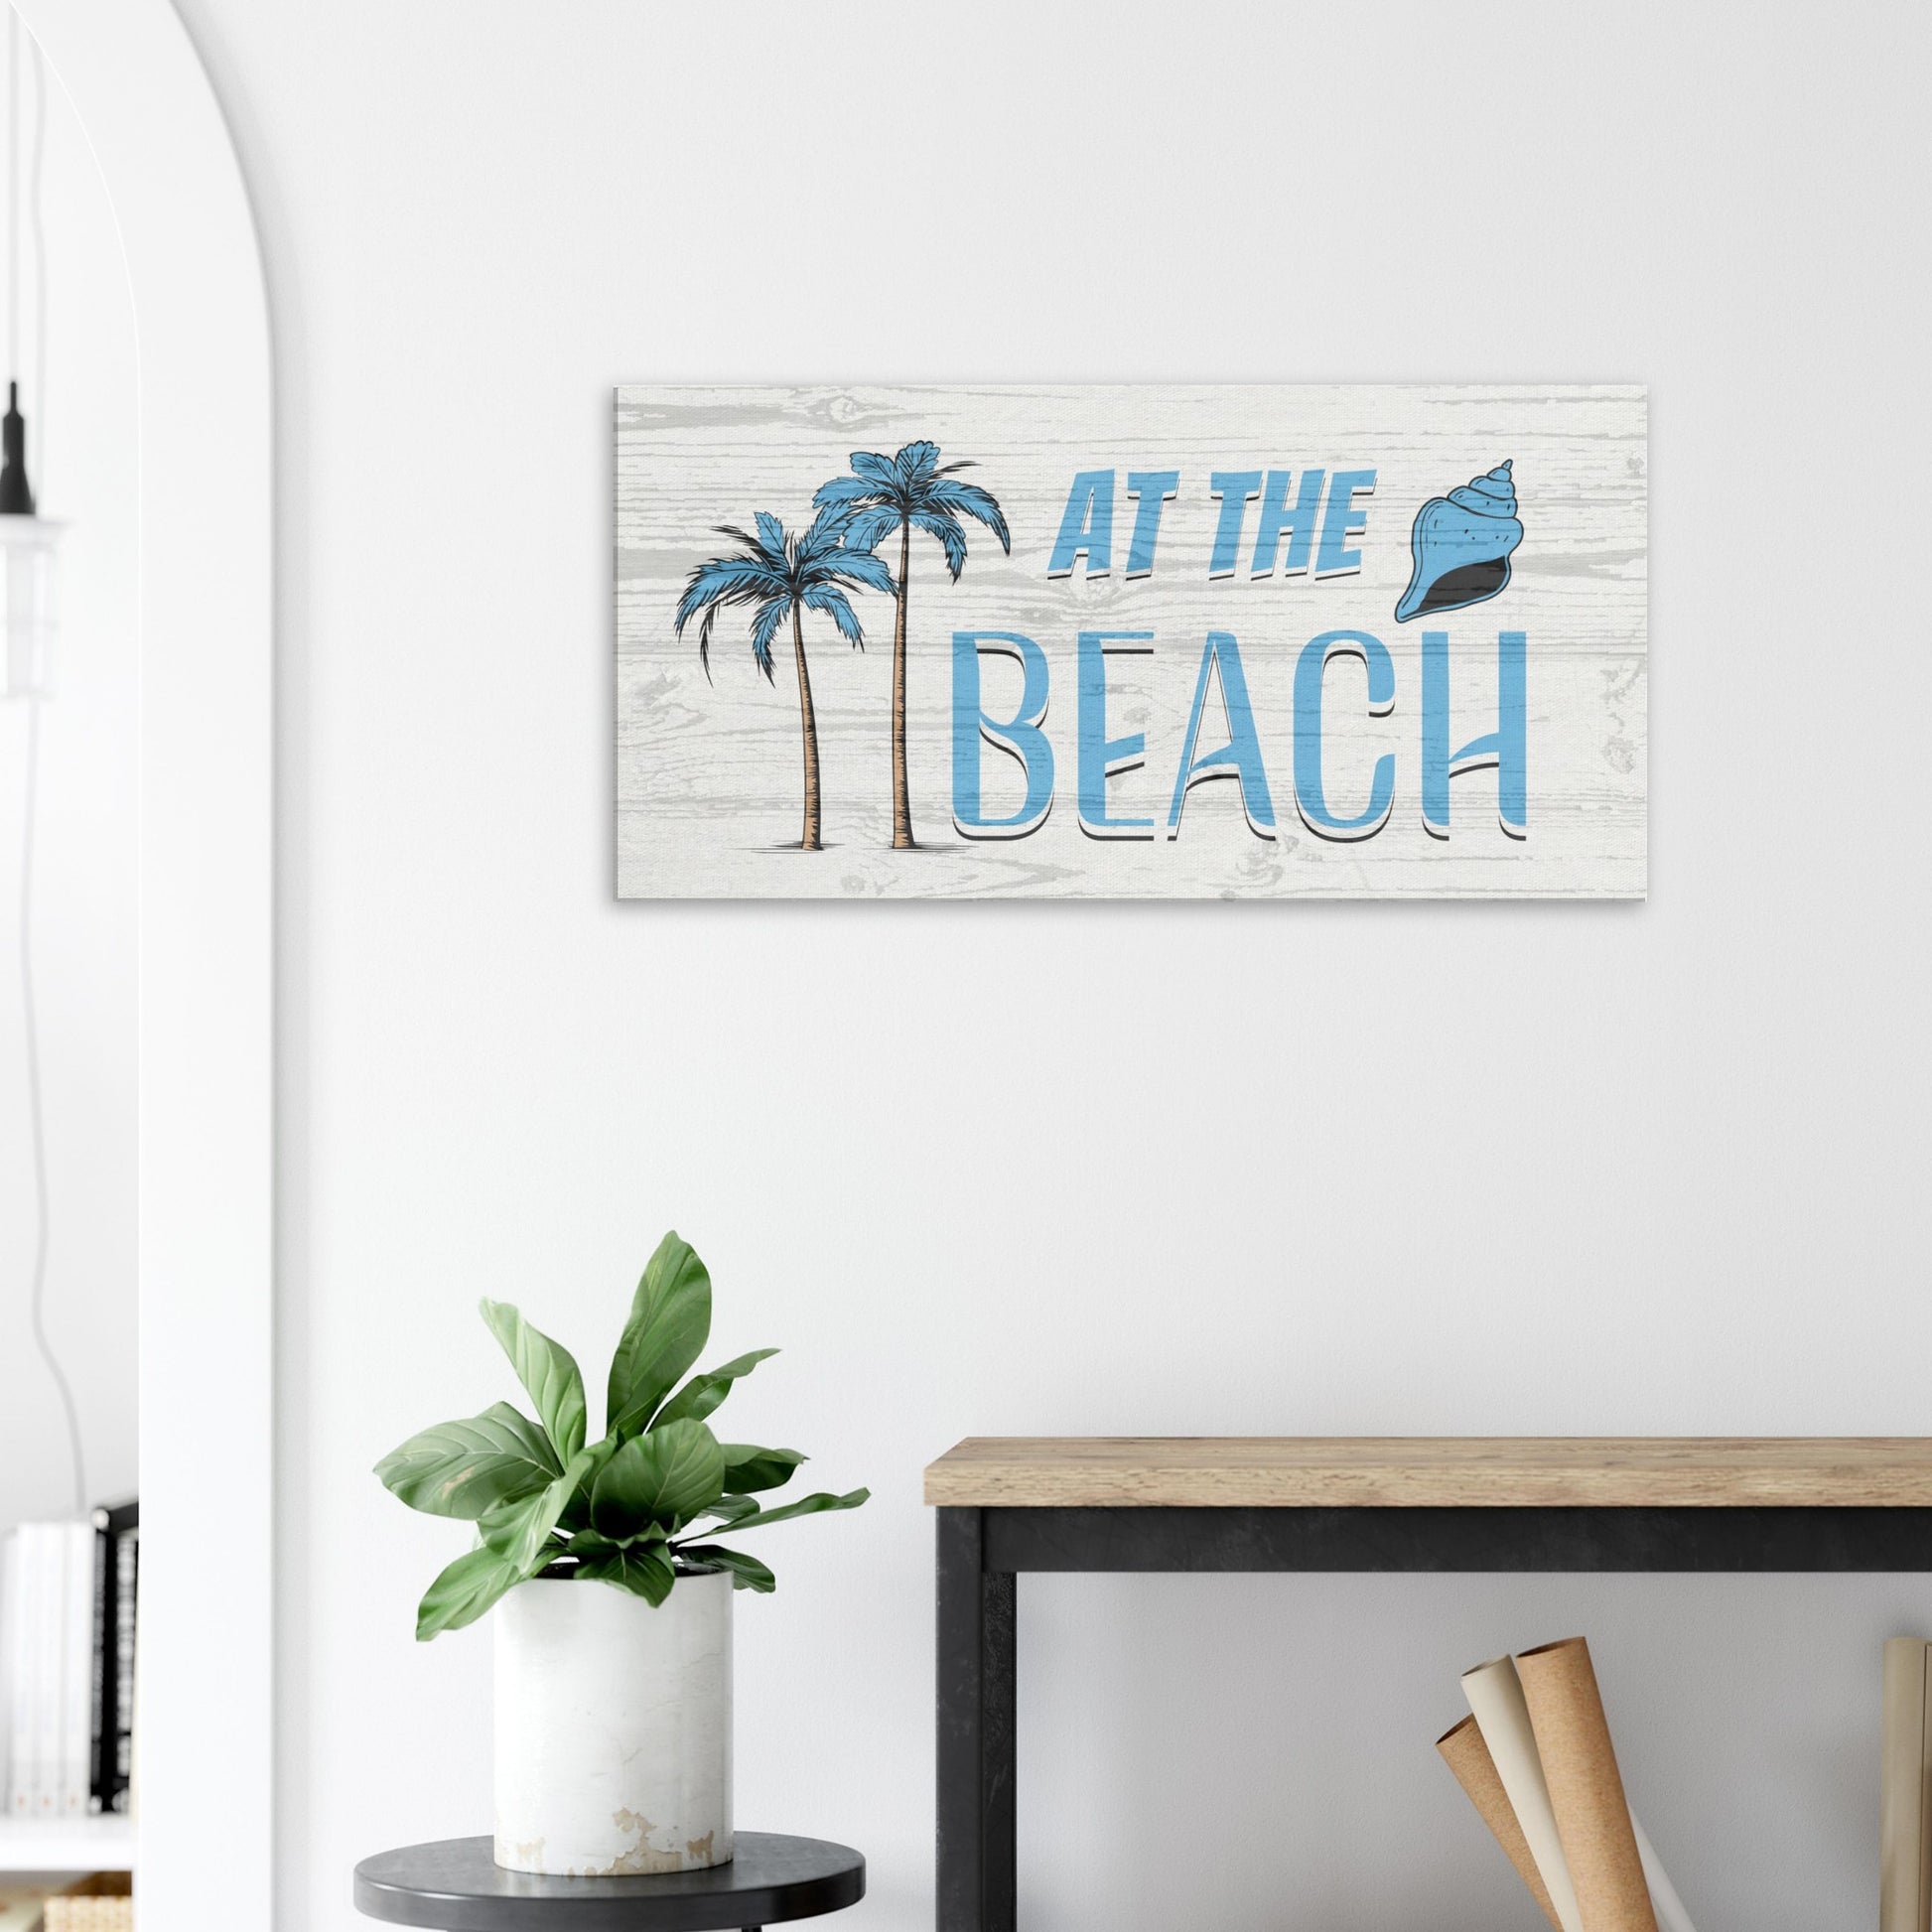 At the Beach Large Blue Canvas Wall Print - Caribbean Rays